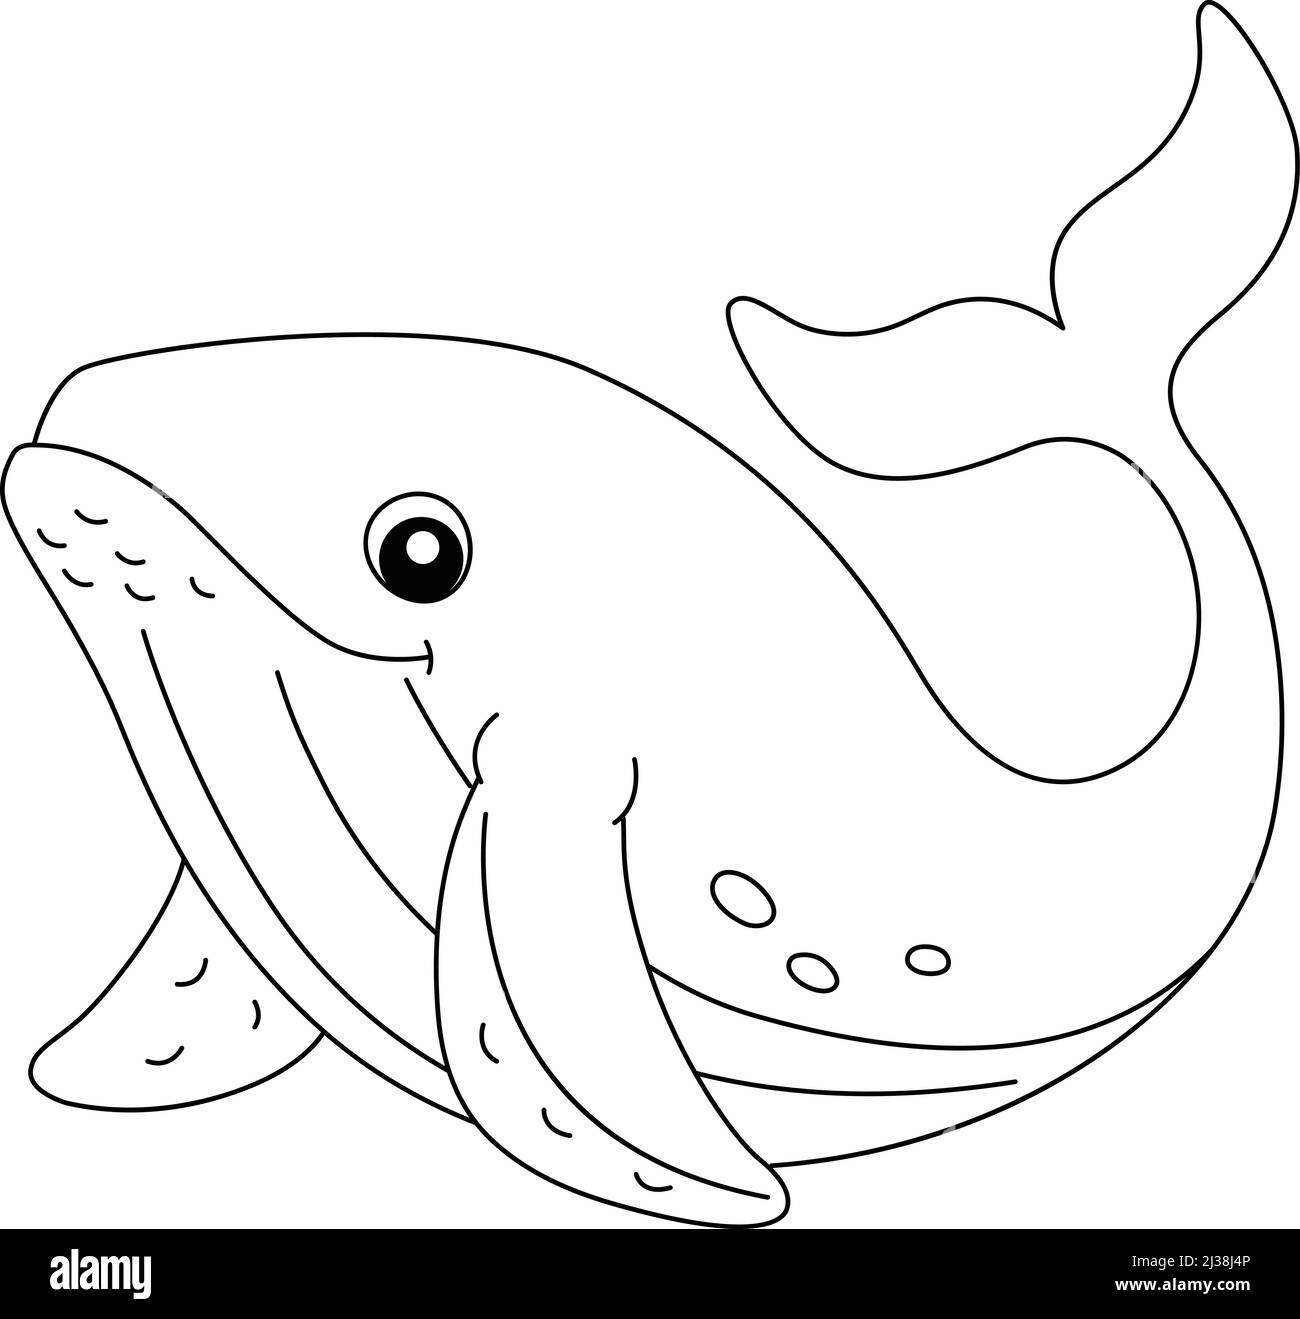 Humpback Whale Coloring Page Isolated for Kids Stock Vector Image ...